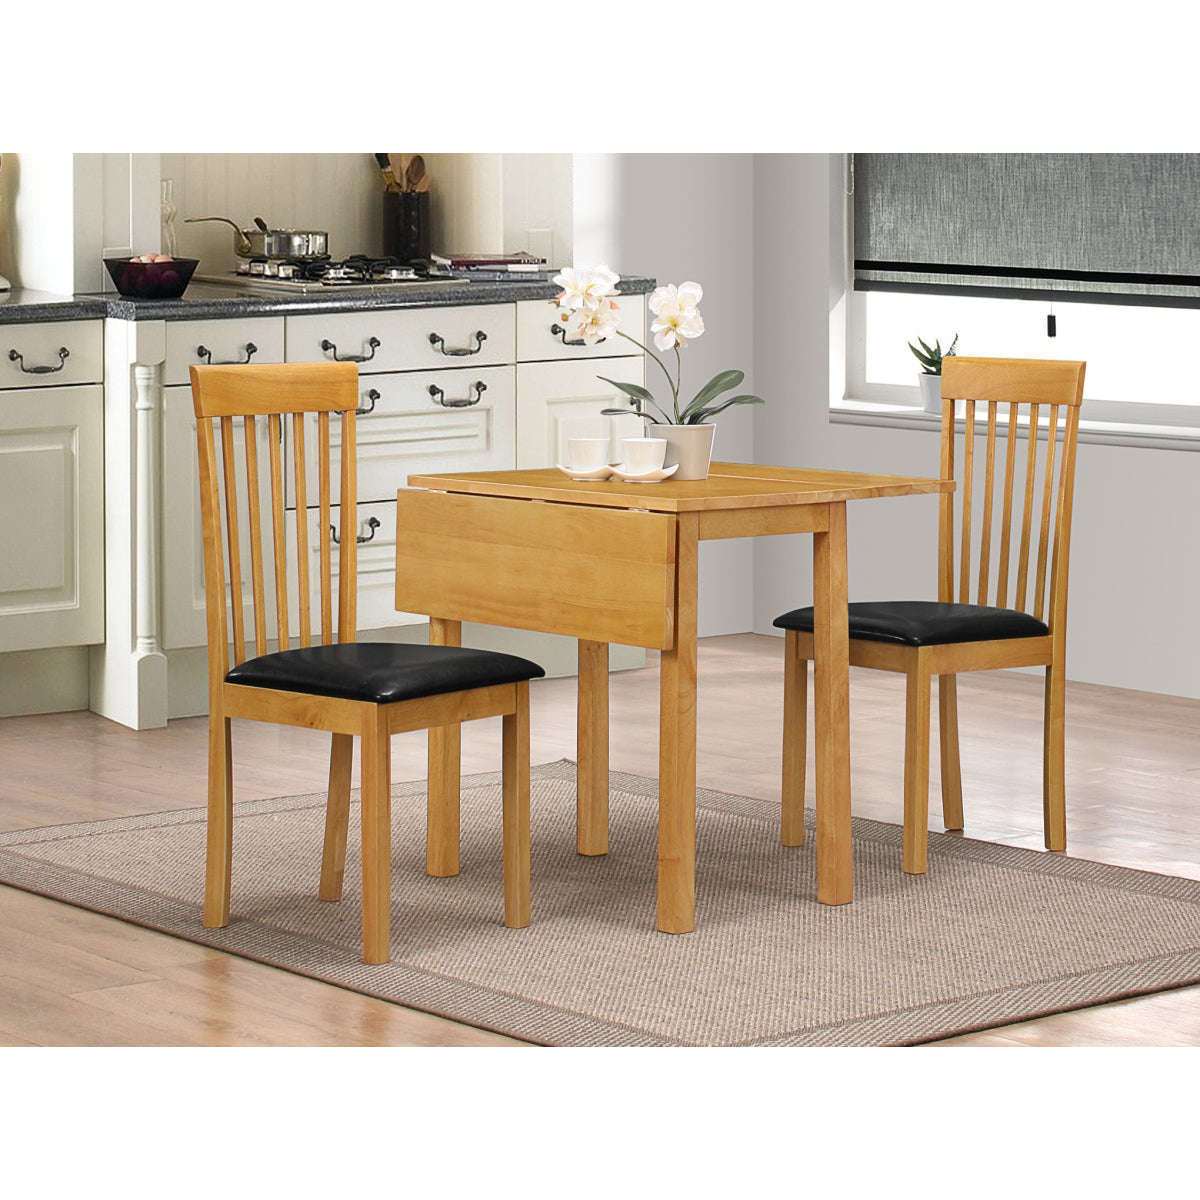 Ashpinoke:Atlas Dropleaf Dining Set with 2 Chairs Natural,Dining Sets,Heartlands Furniture